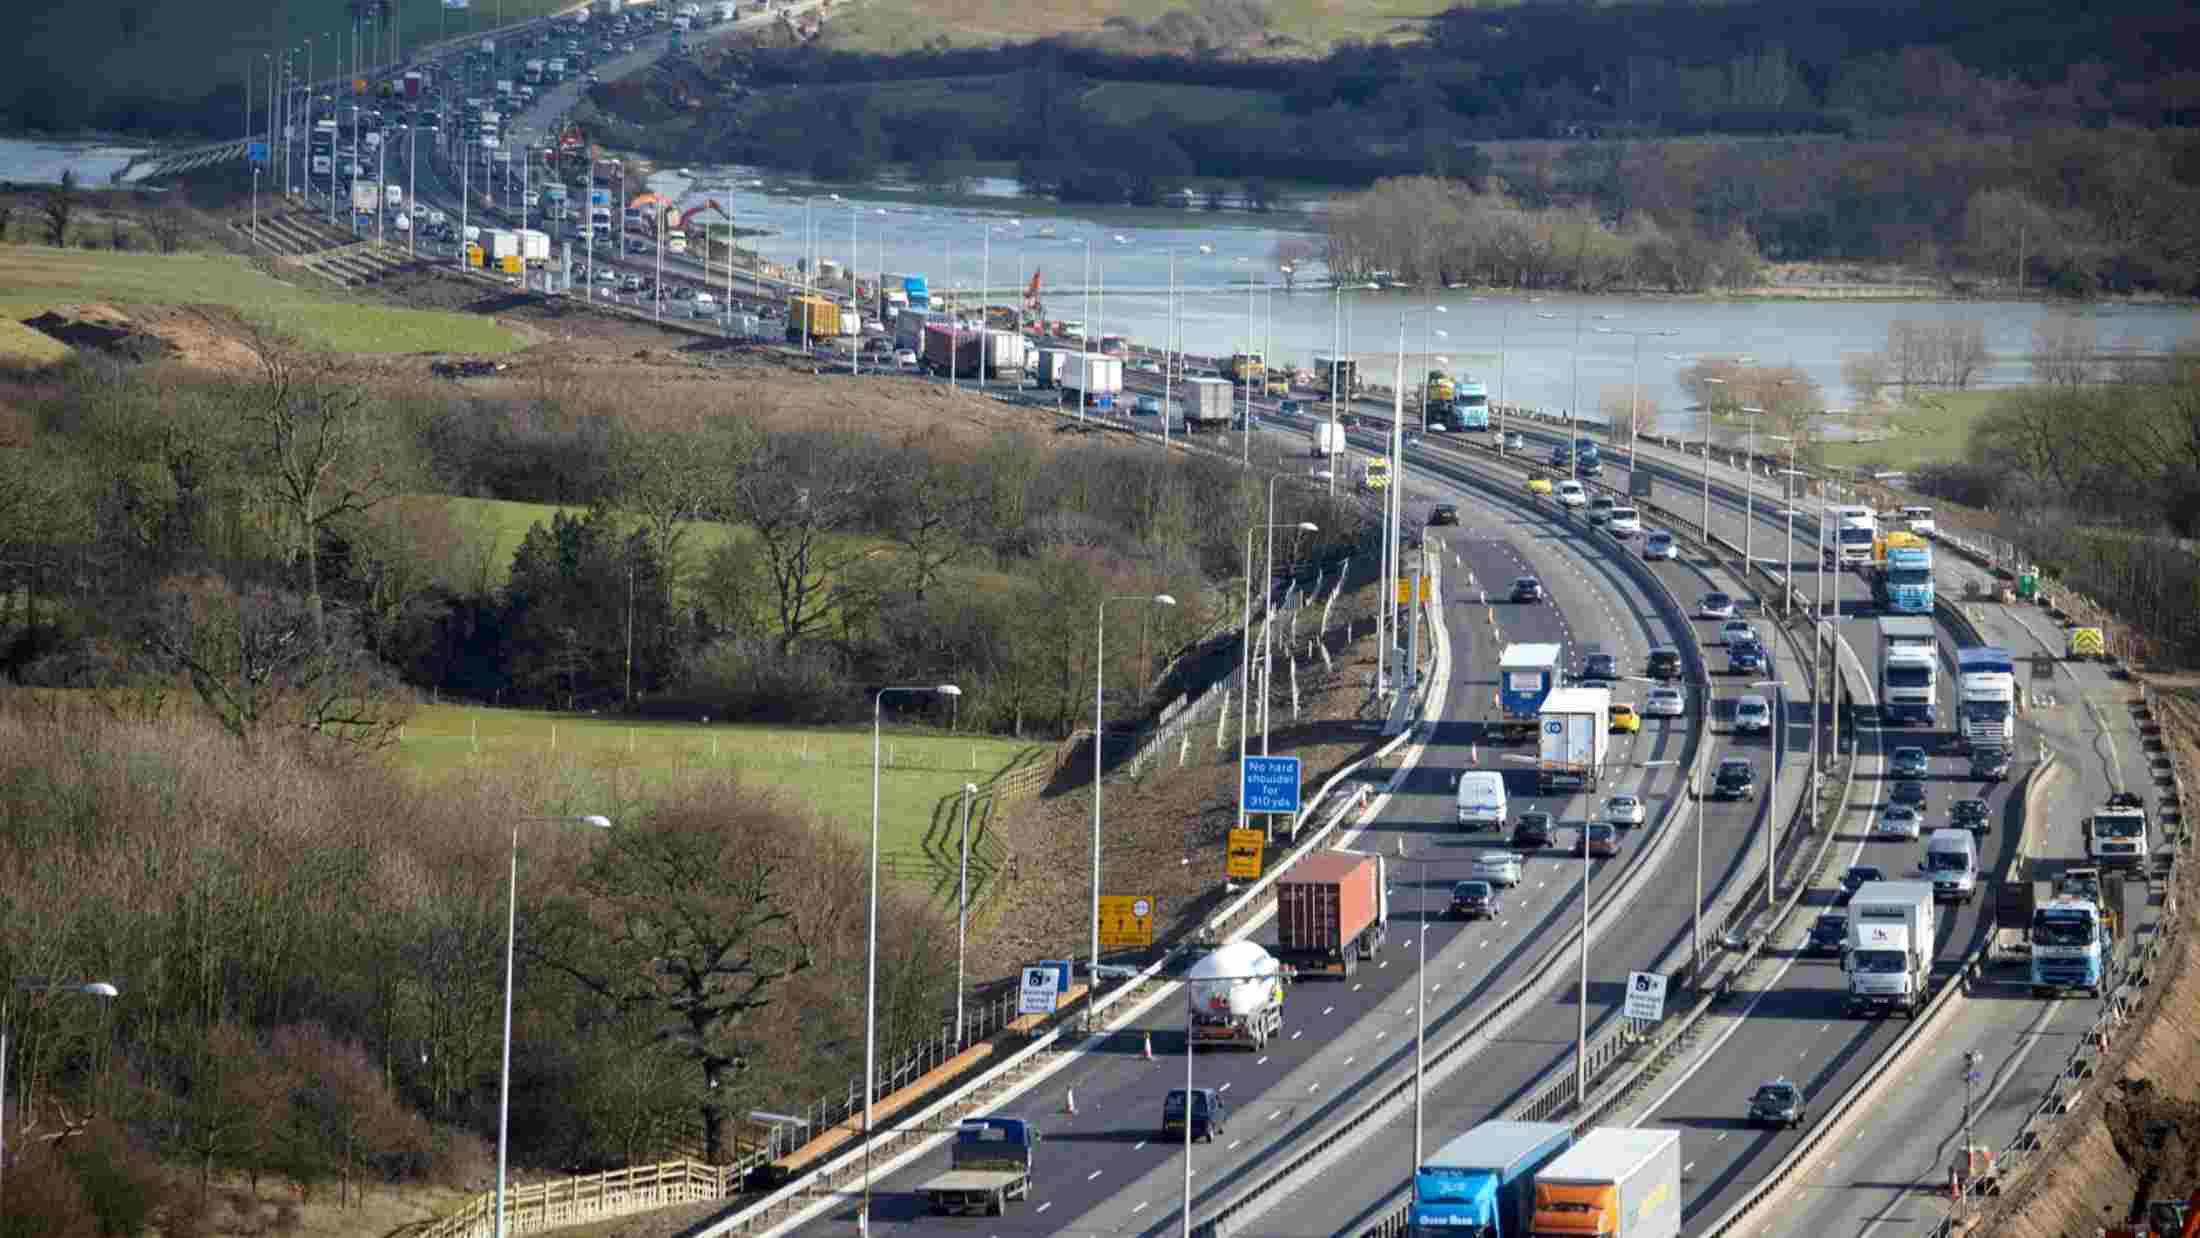 A motorway with a traffic jam